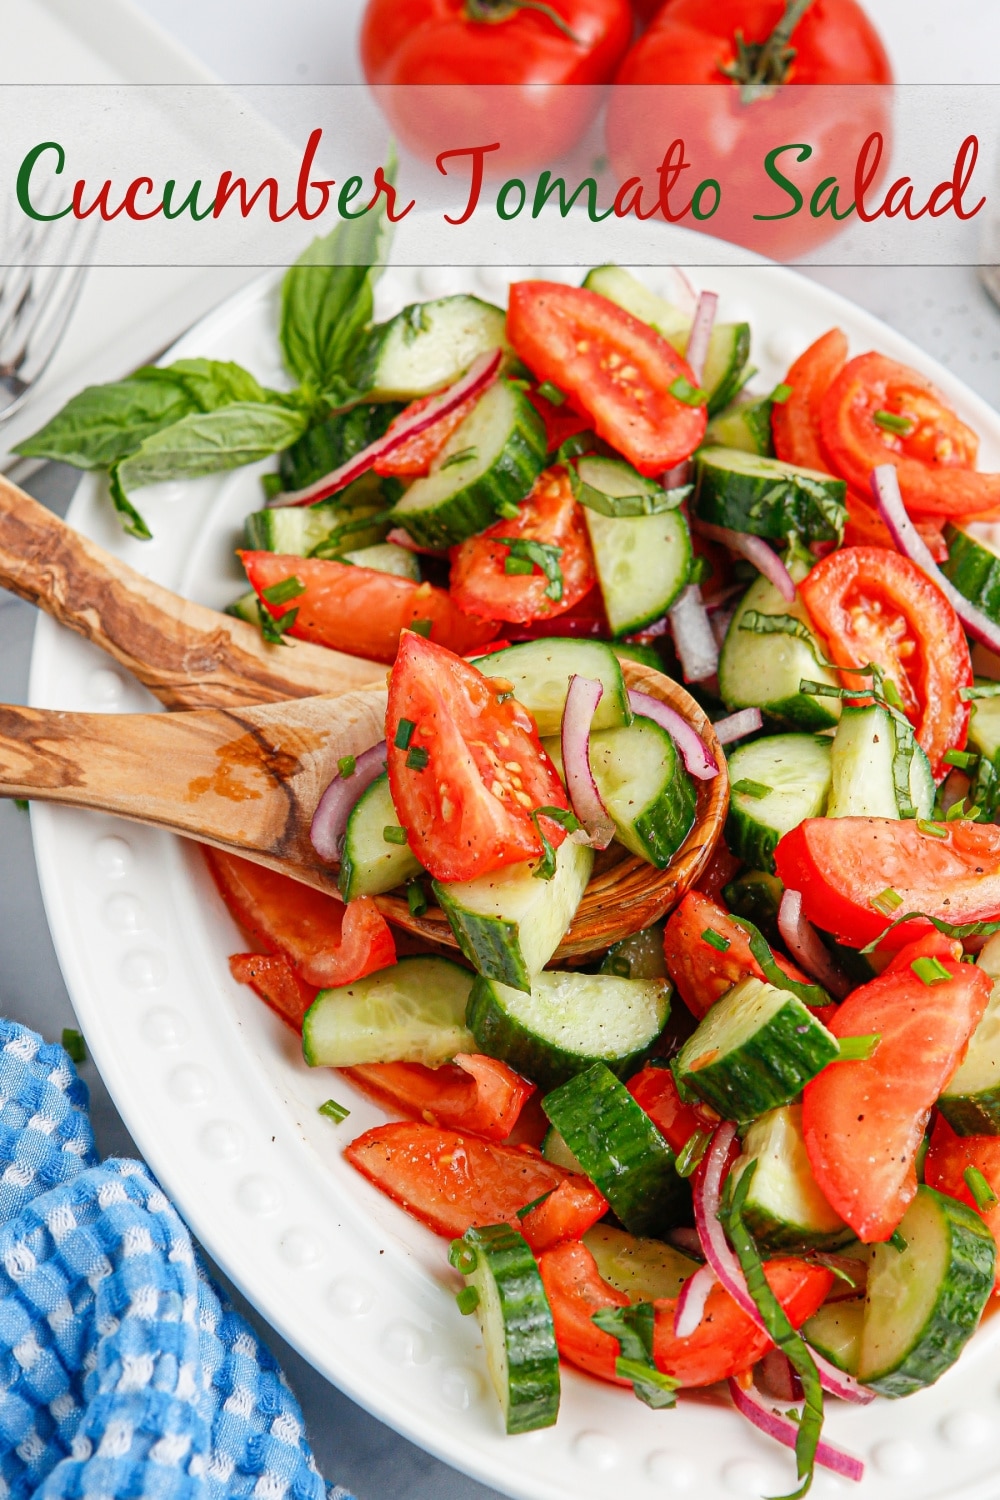 This Cucumber Tomato Salad recipe is a classic ensemble of crisp cucumbers and juicy tomatoes. The refreshing blend of textures and flavors is accented by a vibrant, homemade vinaigrette. It's one of the best summer salad recipes  to use as a side dish. via @cmpollak1